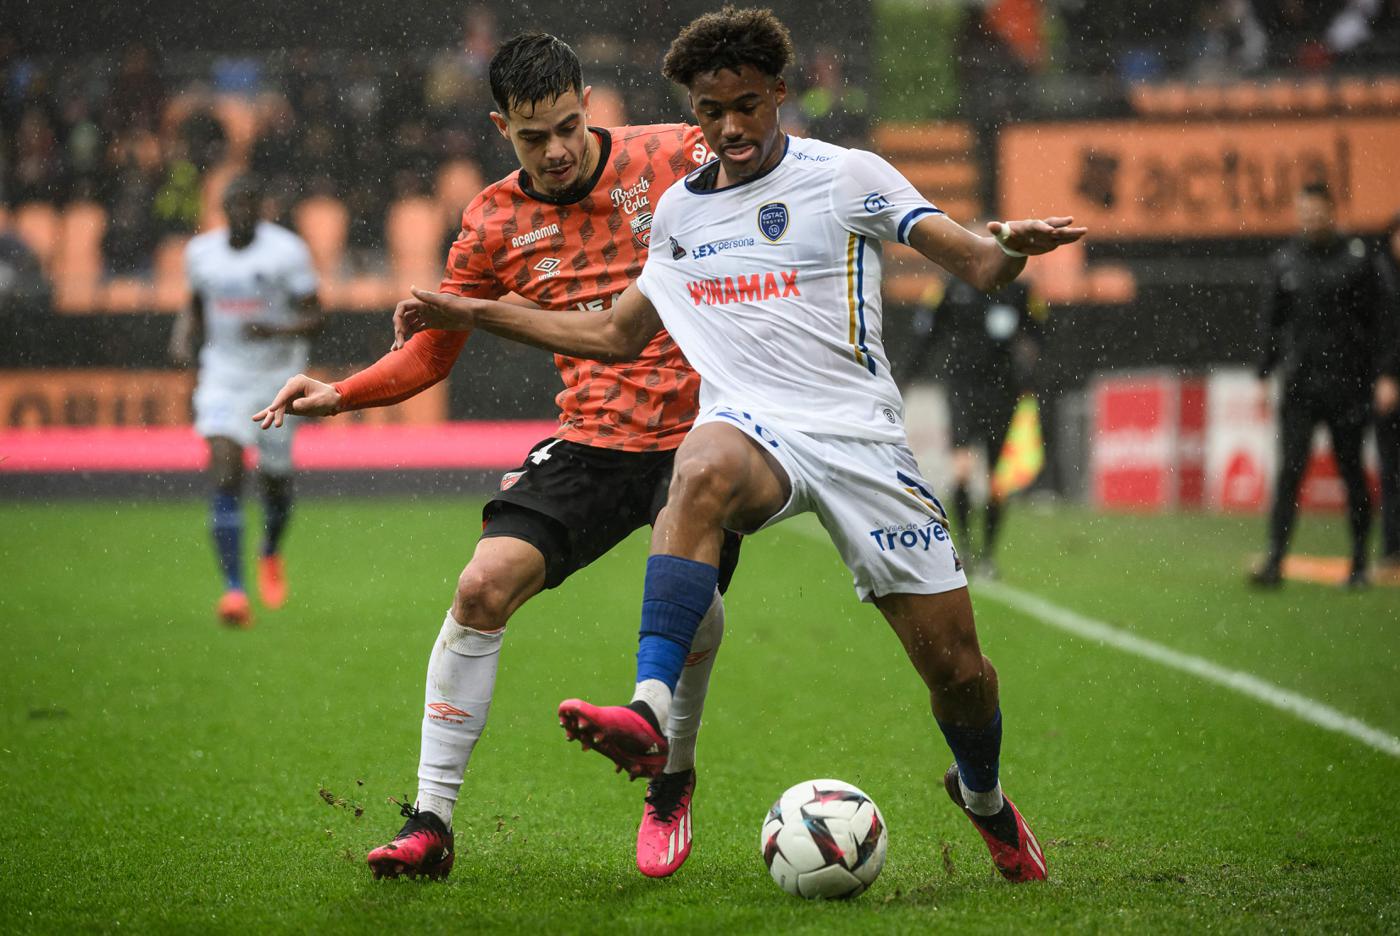 Lorient - Troyes - 2-0. French Championship, round 27. Match review, statistics.